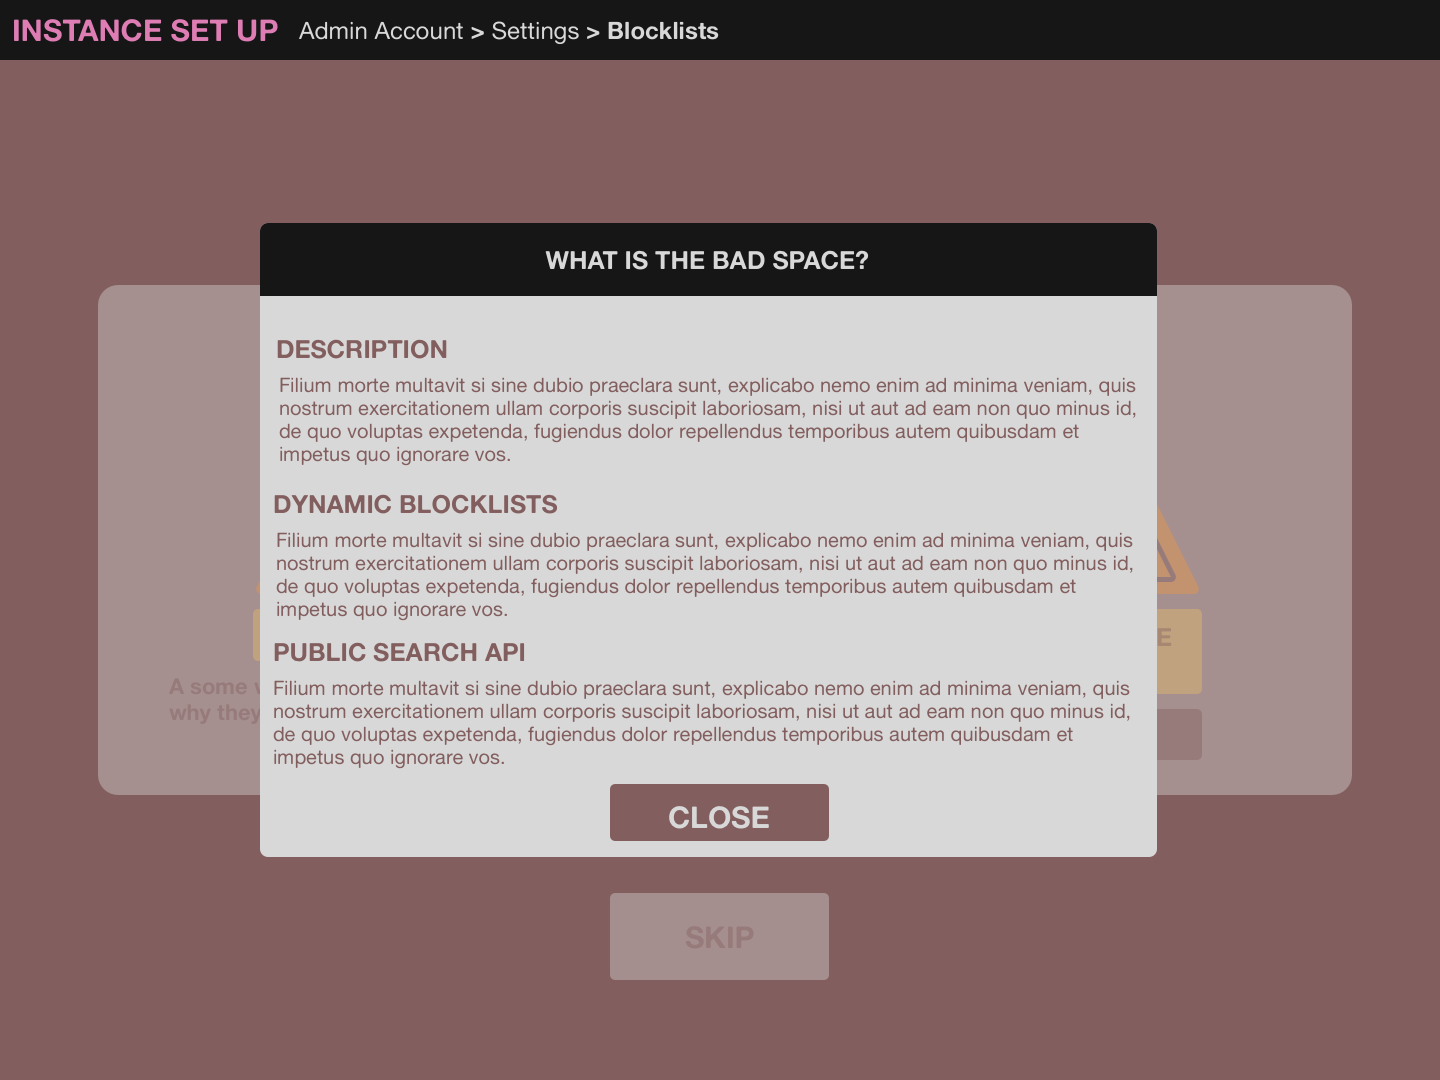 Image of a mock admin panel. Panel is showing mock options and short
description of a The Bad Space integration.